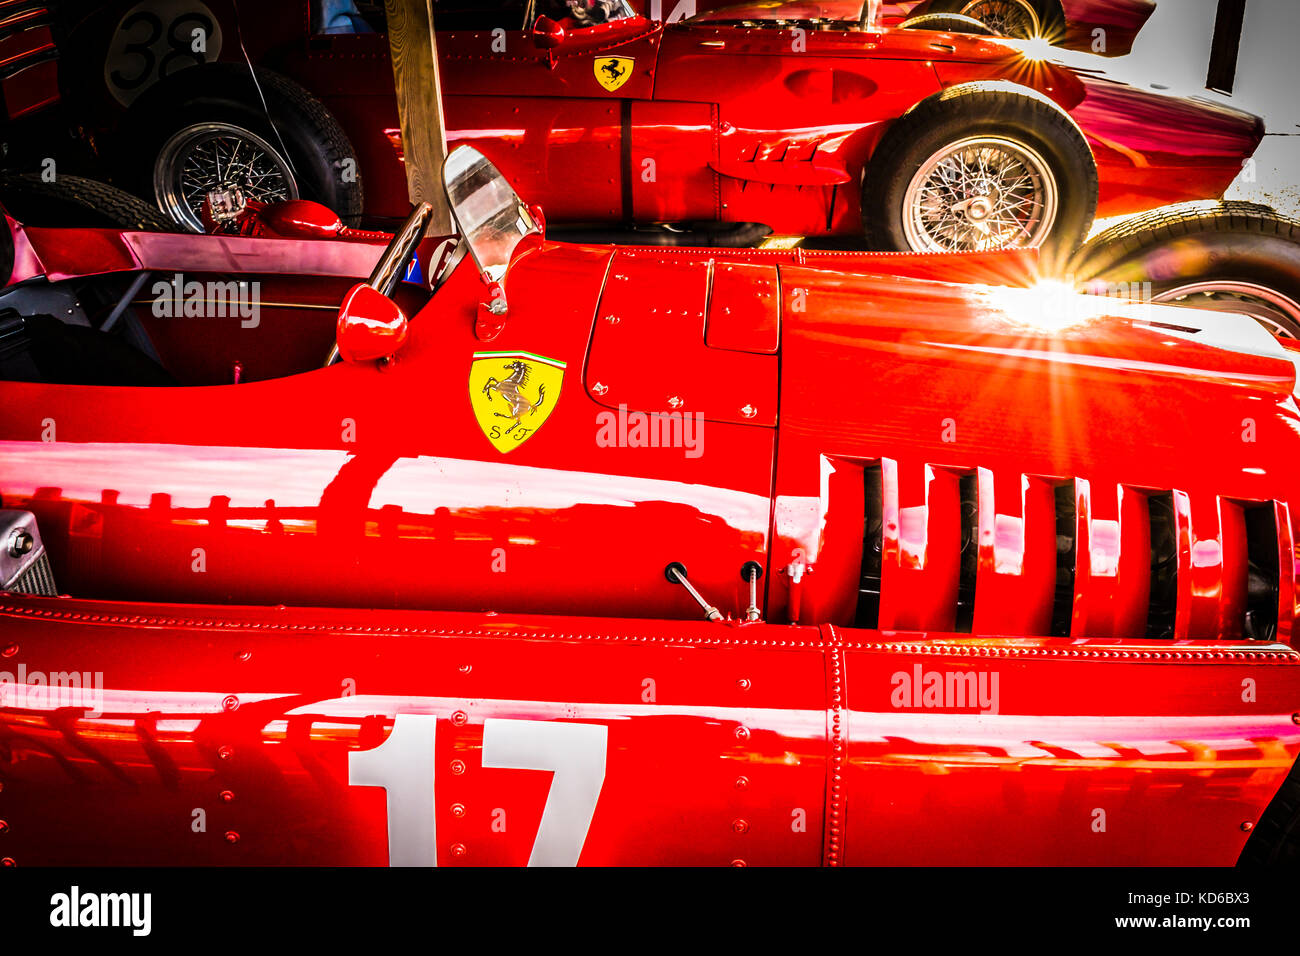 1954 Lancia D50 and 1960 Ferrari 246 Dino catch the early morning sun in the paddock garage at the 2017 Goodwood Revival, Sussex, UK. Stock Photo